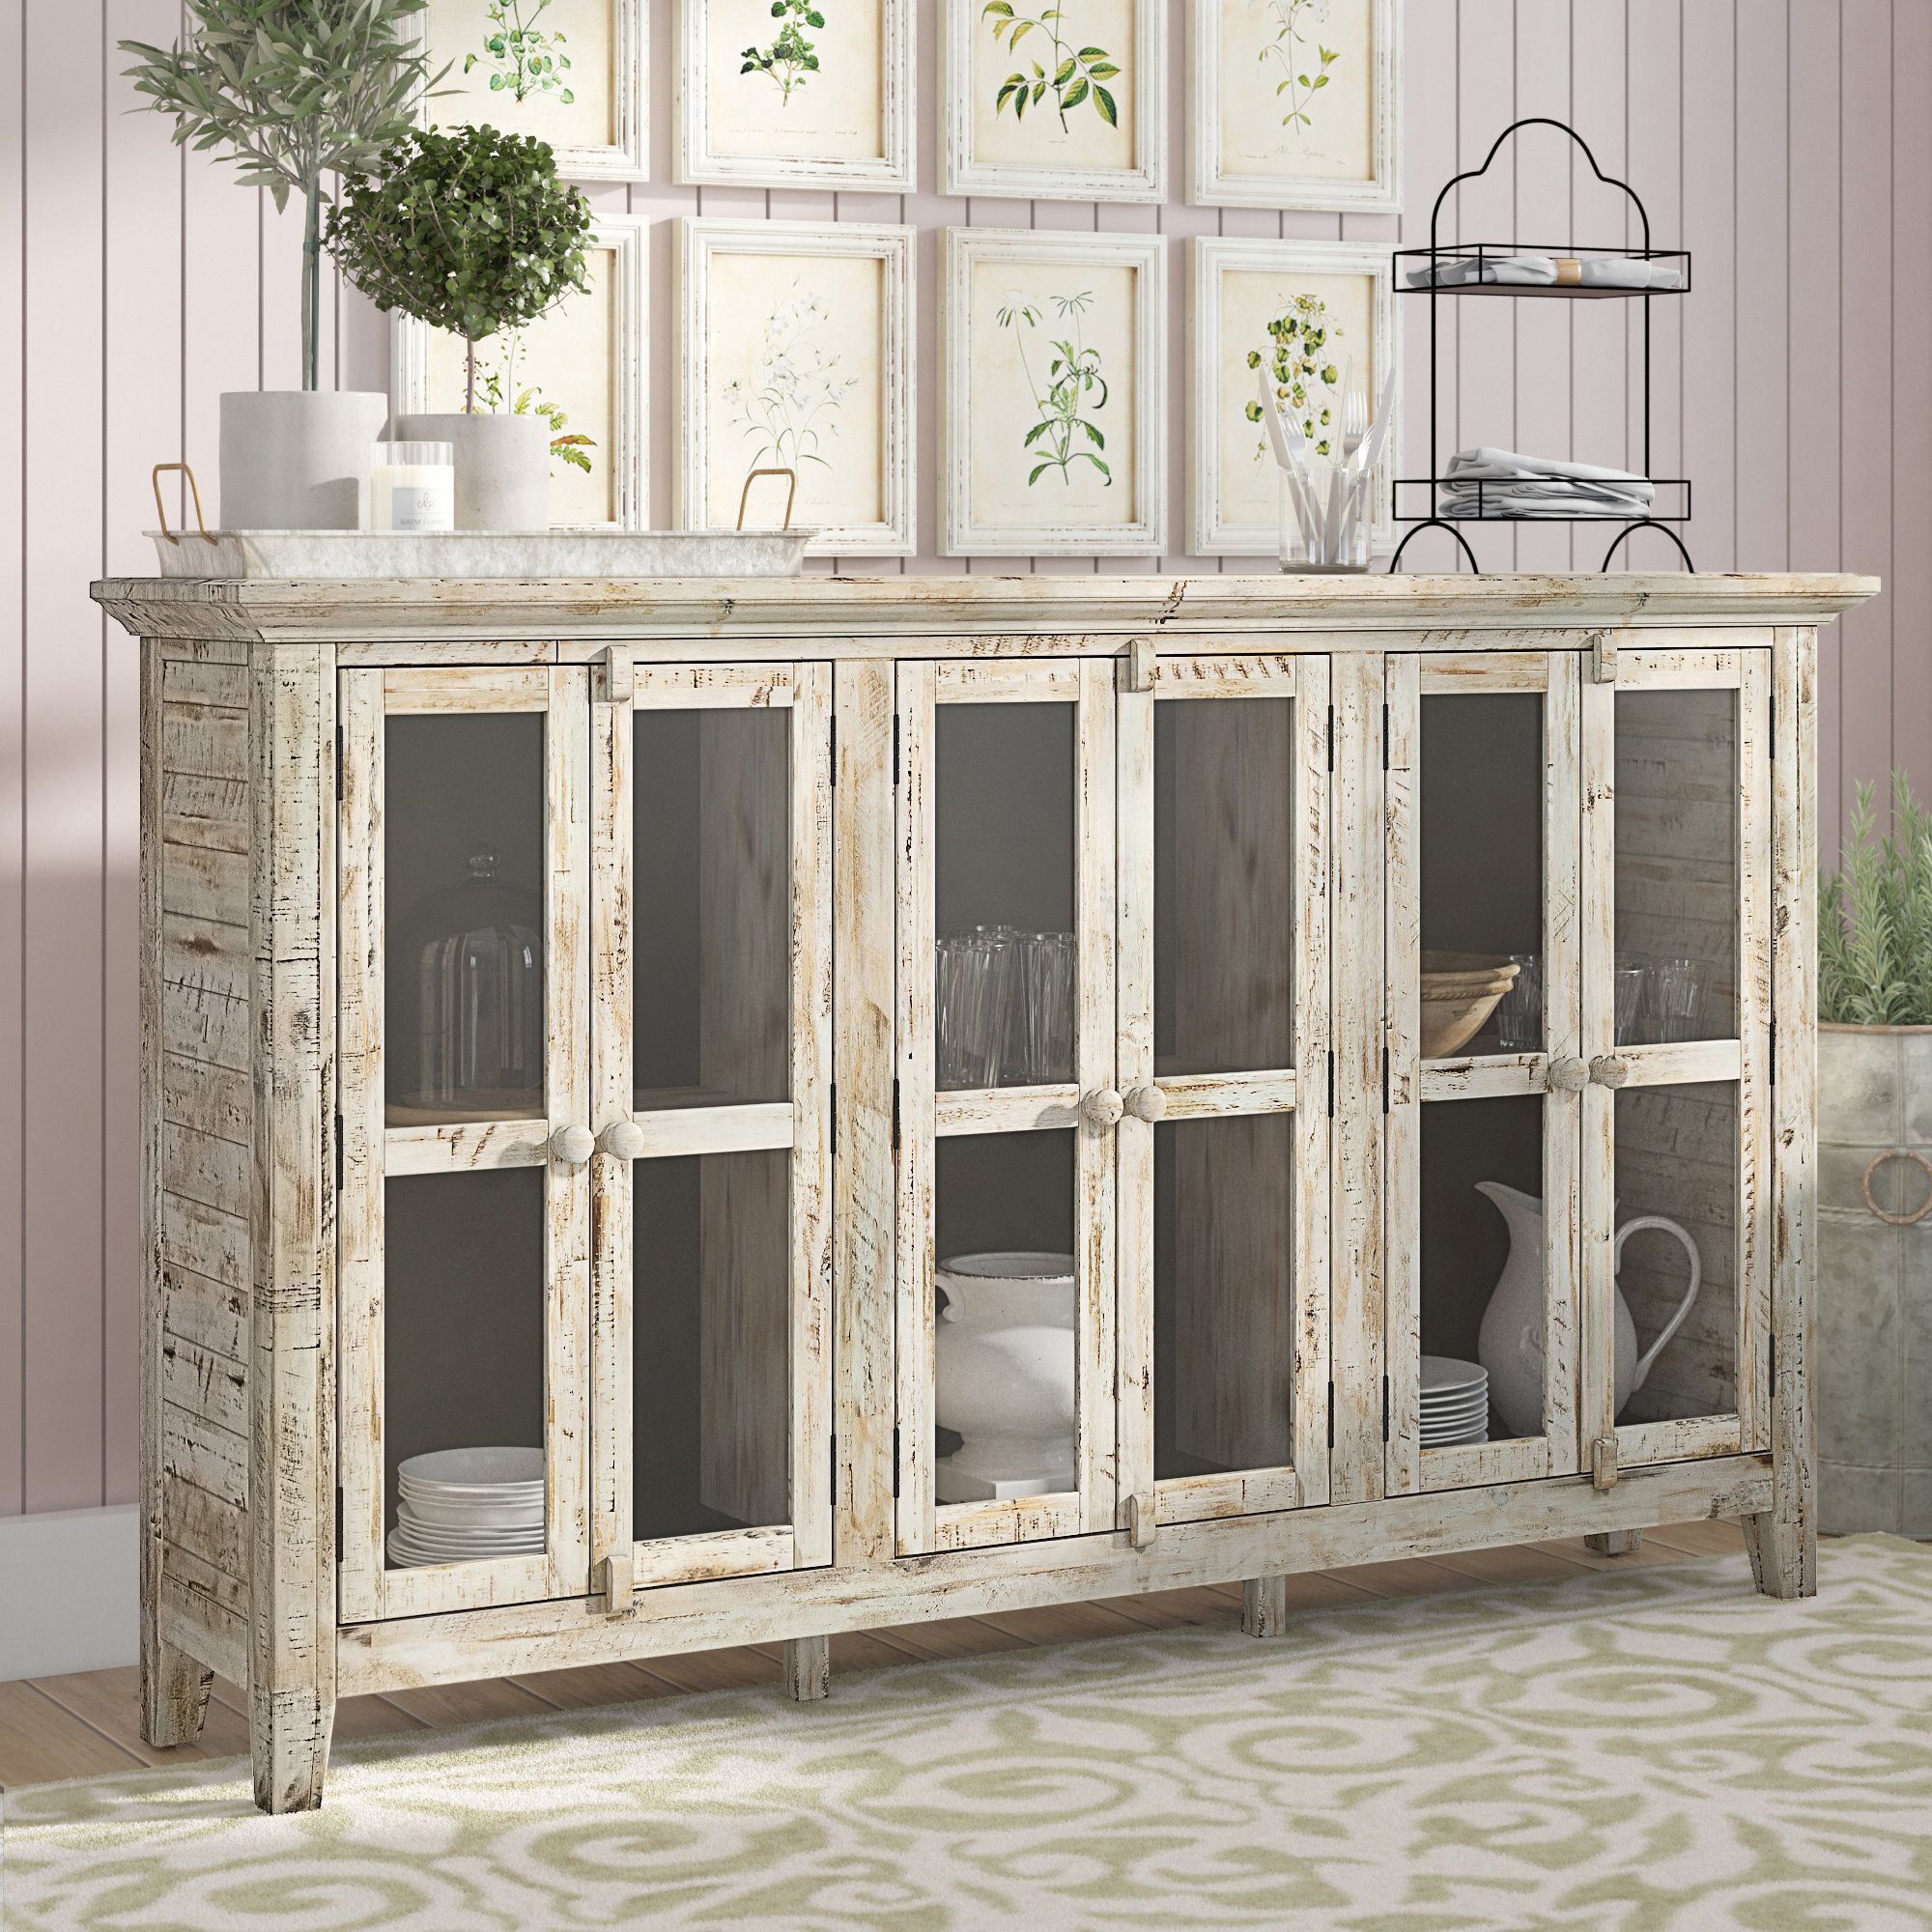 Credenza Cabinet Bed | Wayfair Inside Pink And Navy Peaks Credenzas (View 21 of 30)